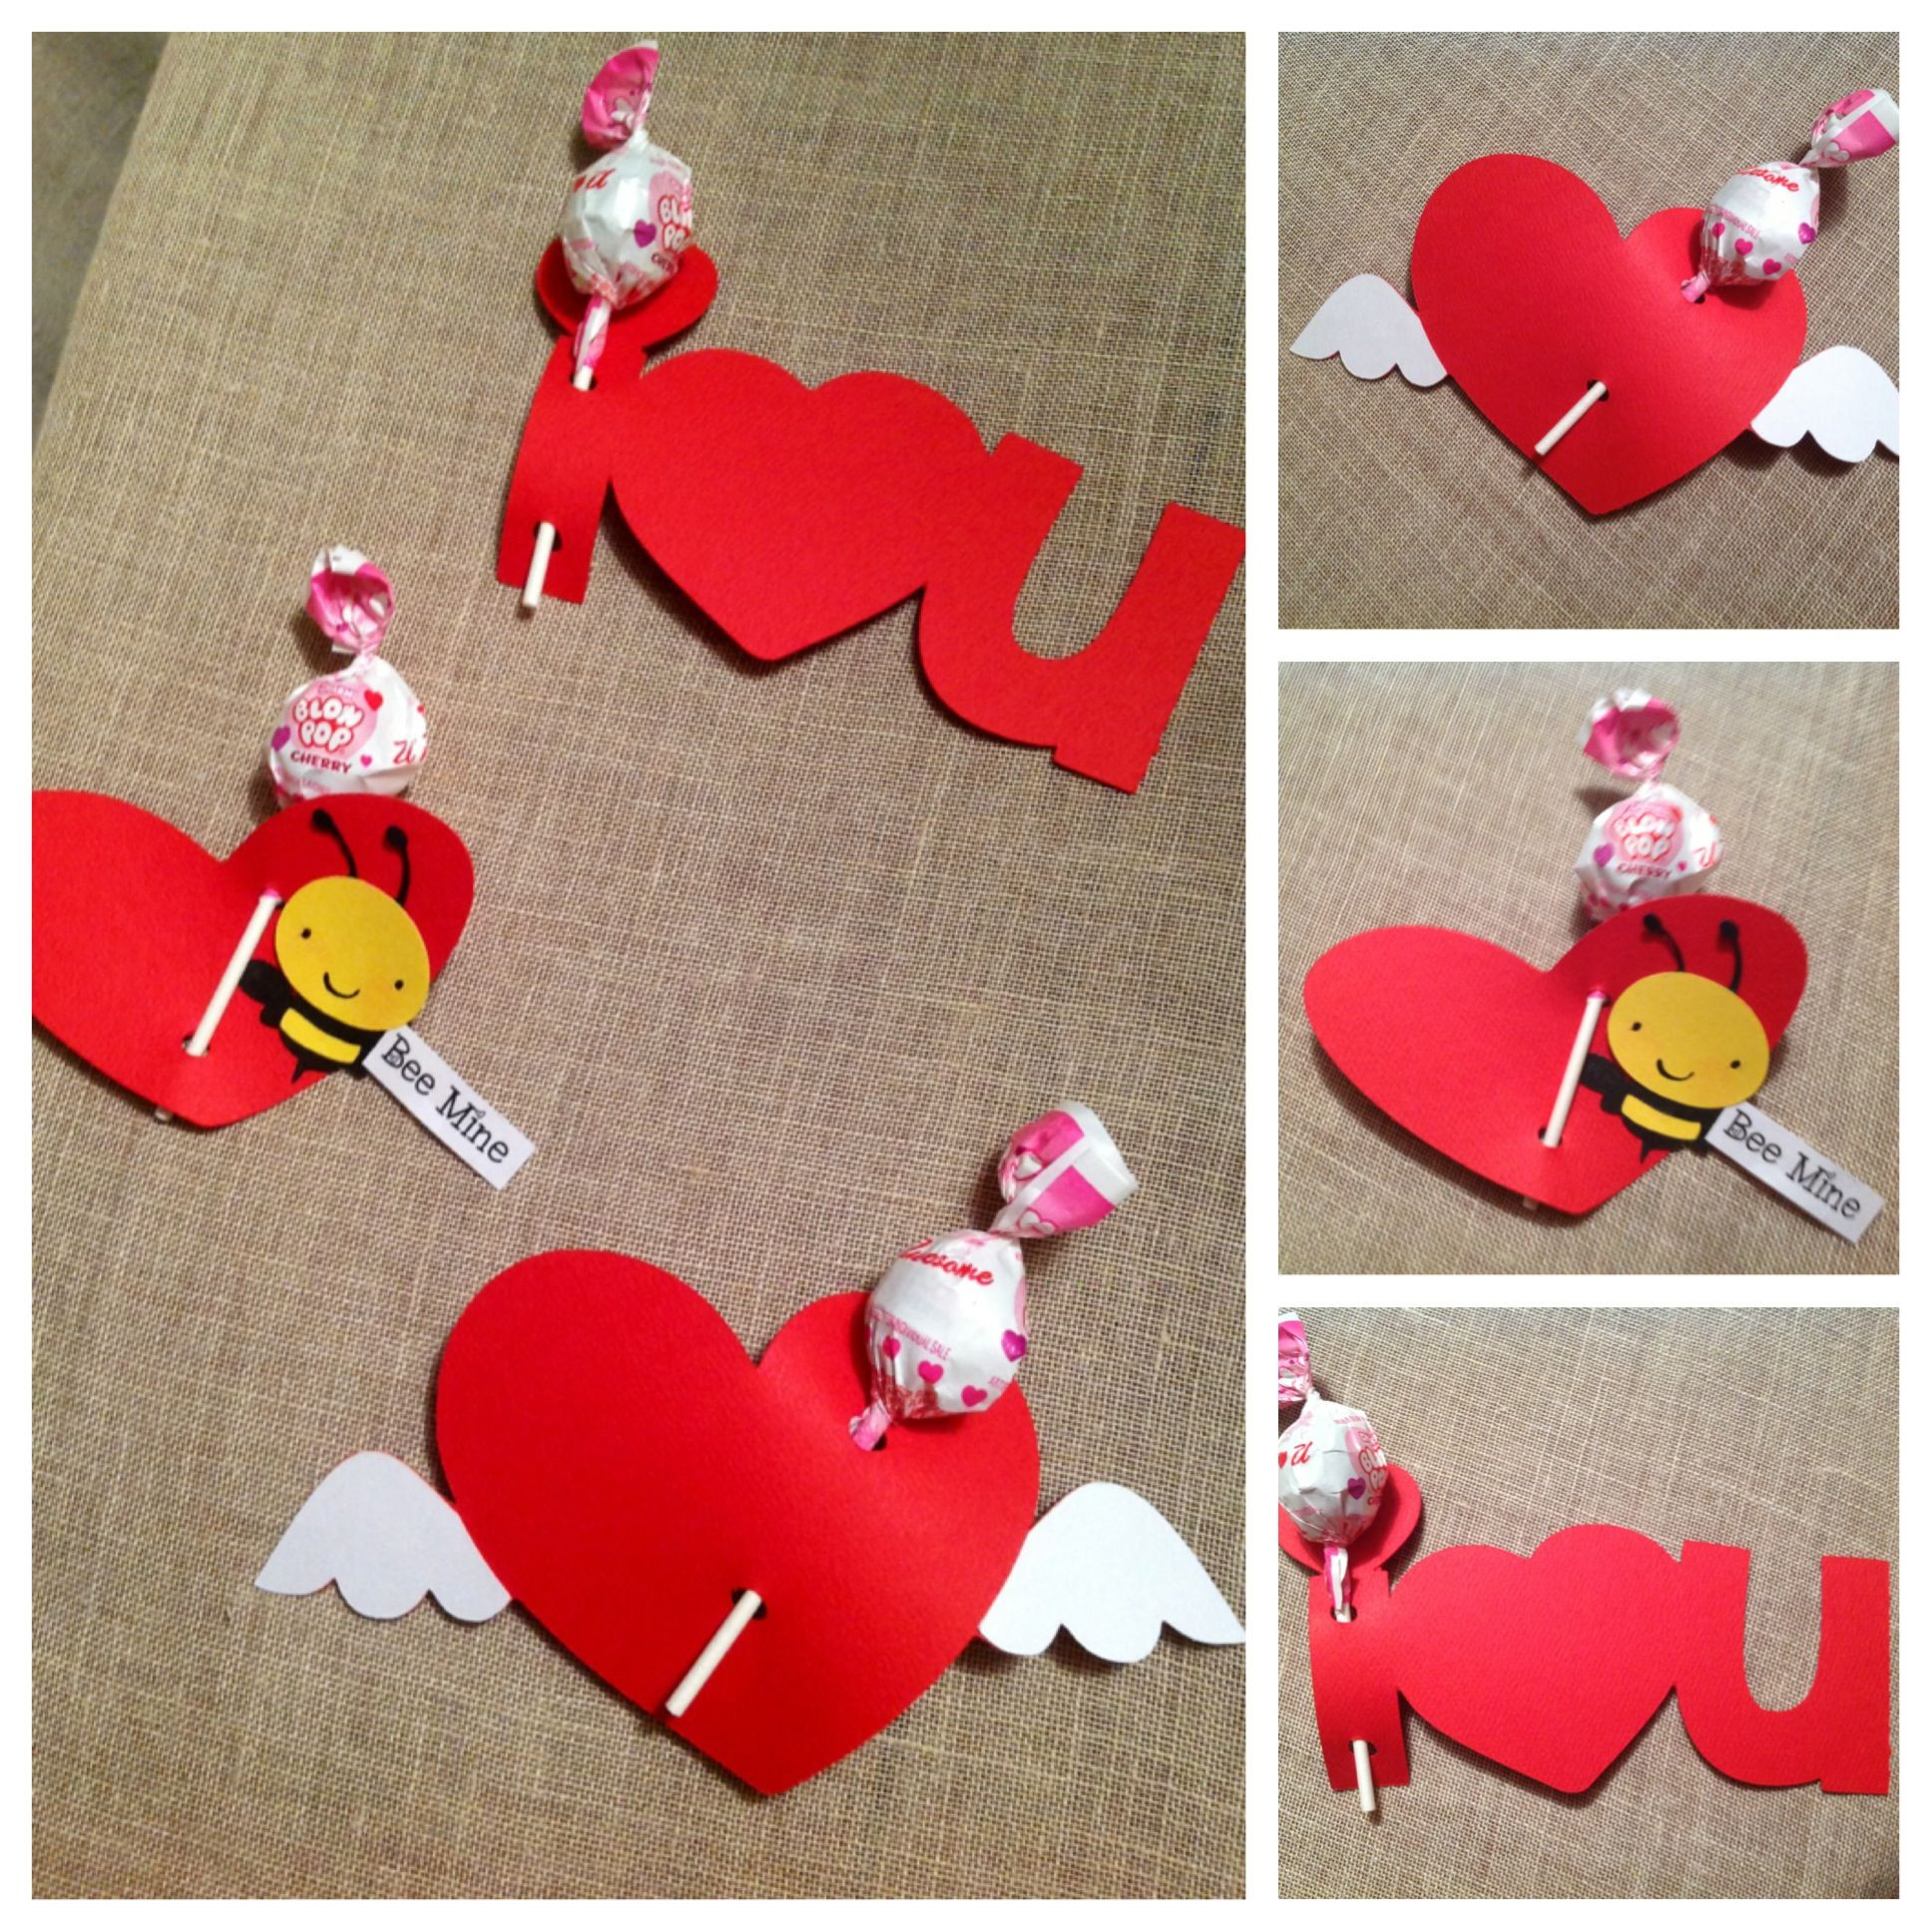 Valentines Day Candy Grams
 Candygram Fundraiser Cute idea Valentine s Day